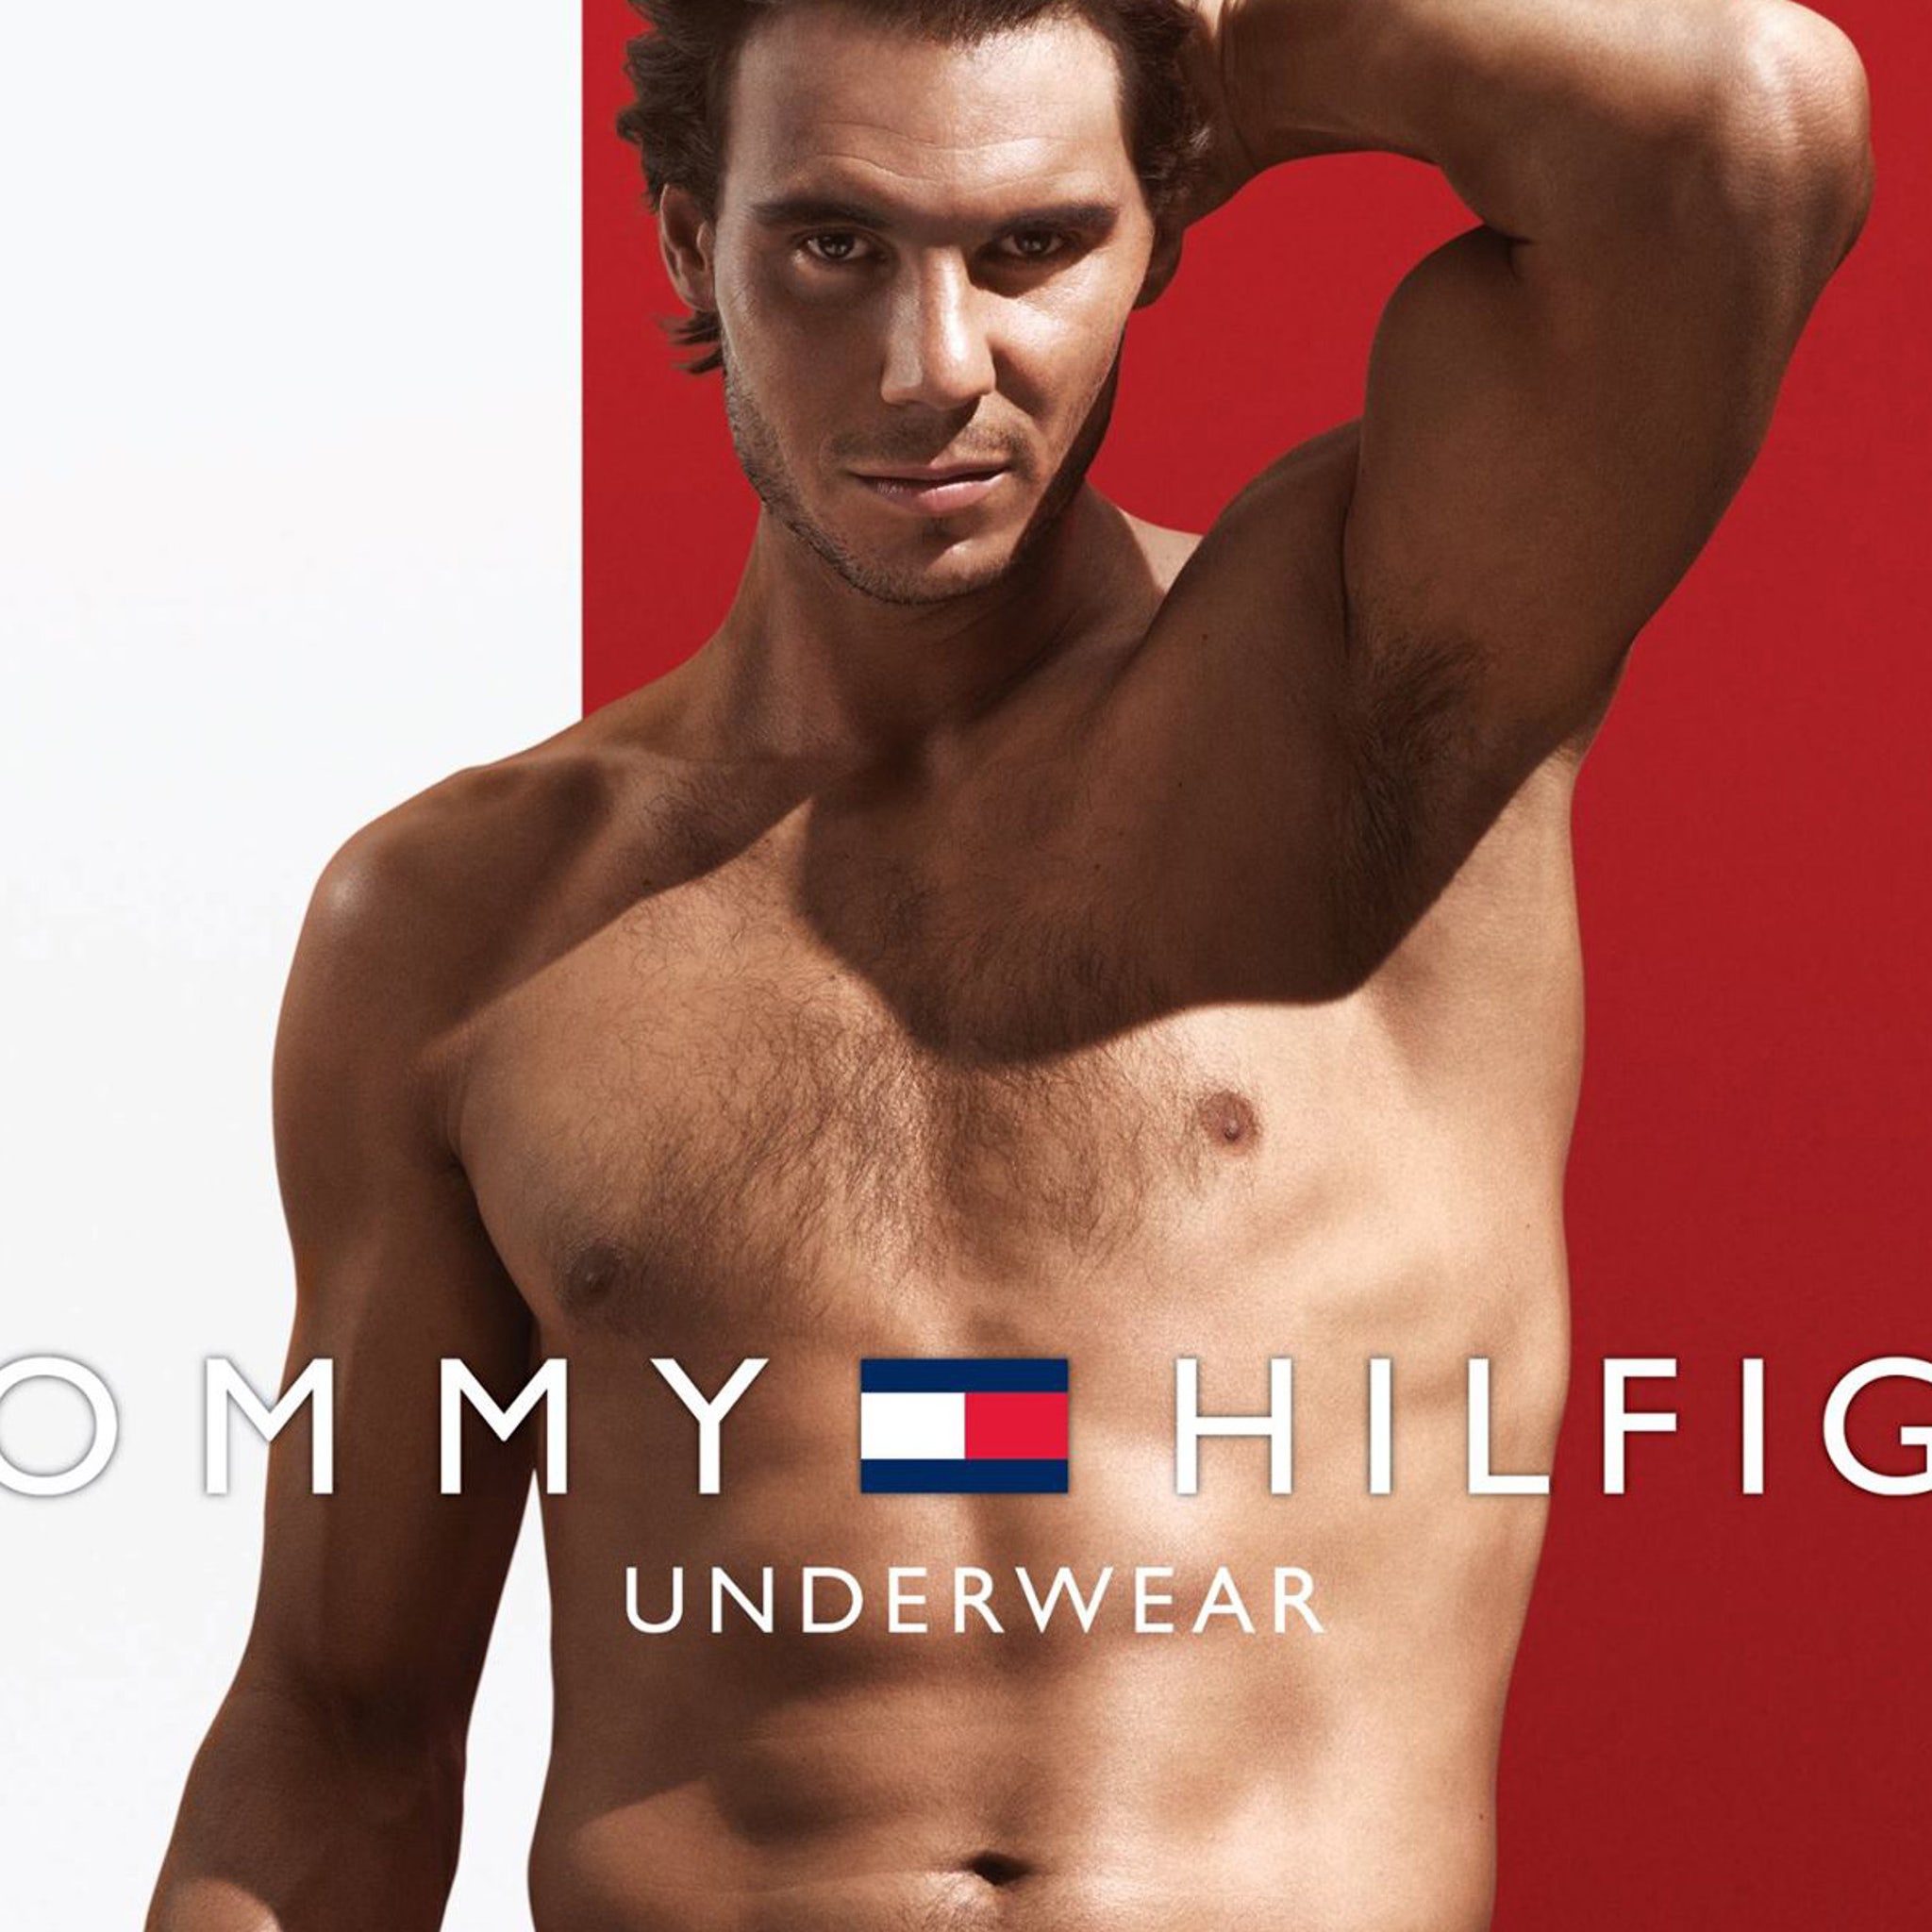 Rafael Nadal Strips Down Shirtless to His Underwear for Sexy Tommy Hilfiger  Campaign!: Photo 3445561, Rafael Nadal, Shirtless Photos